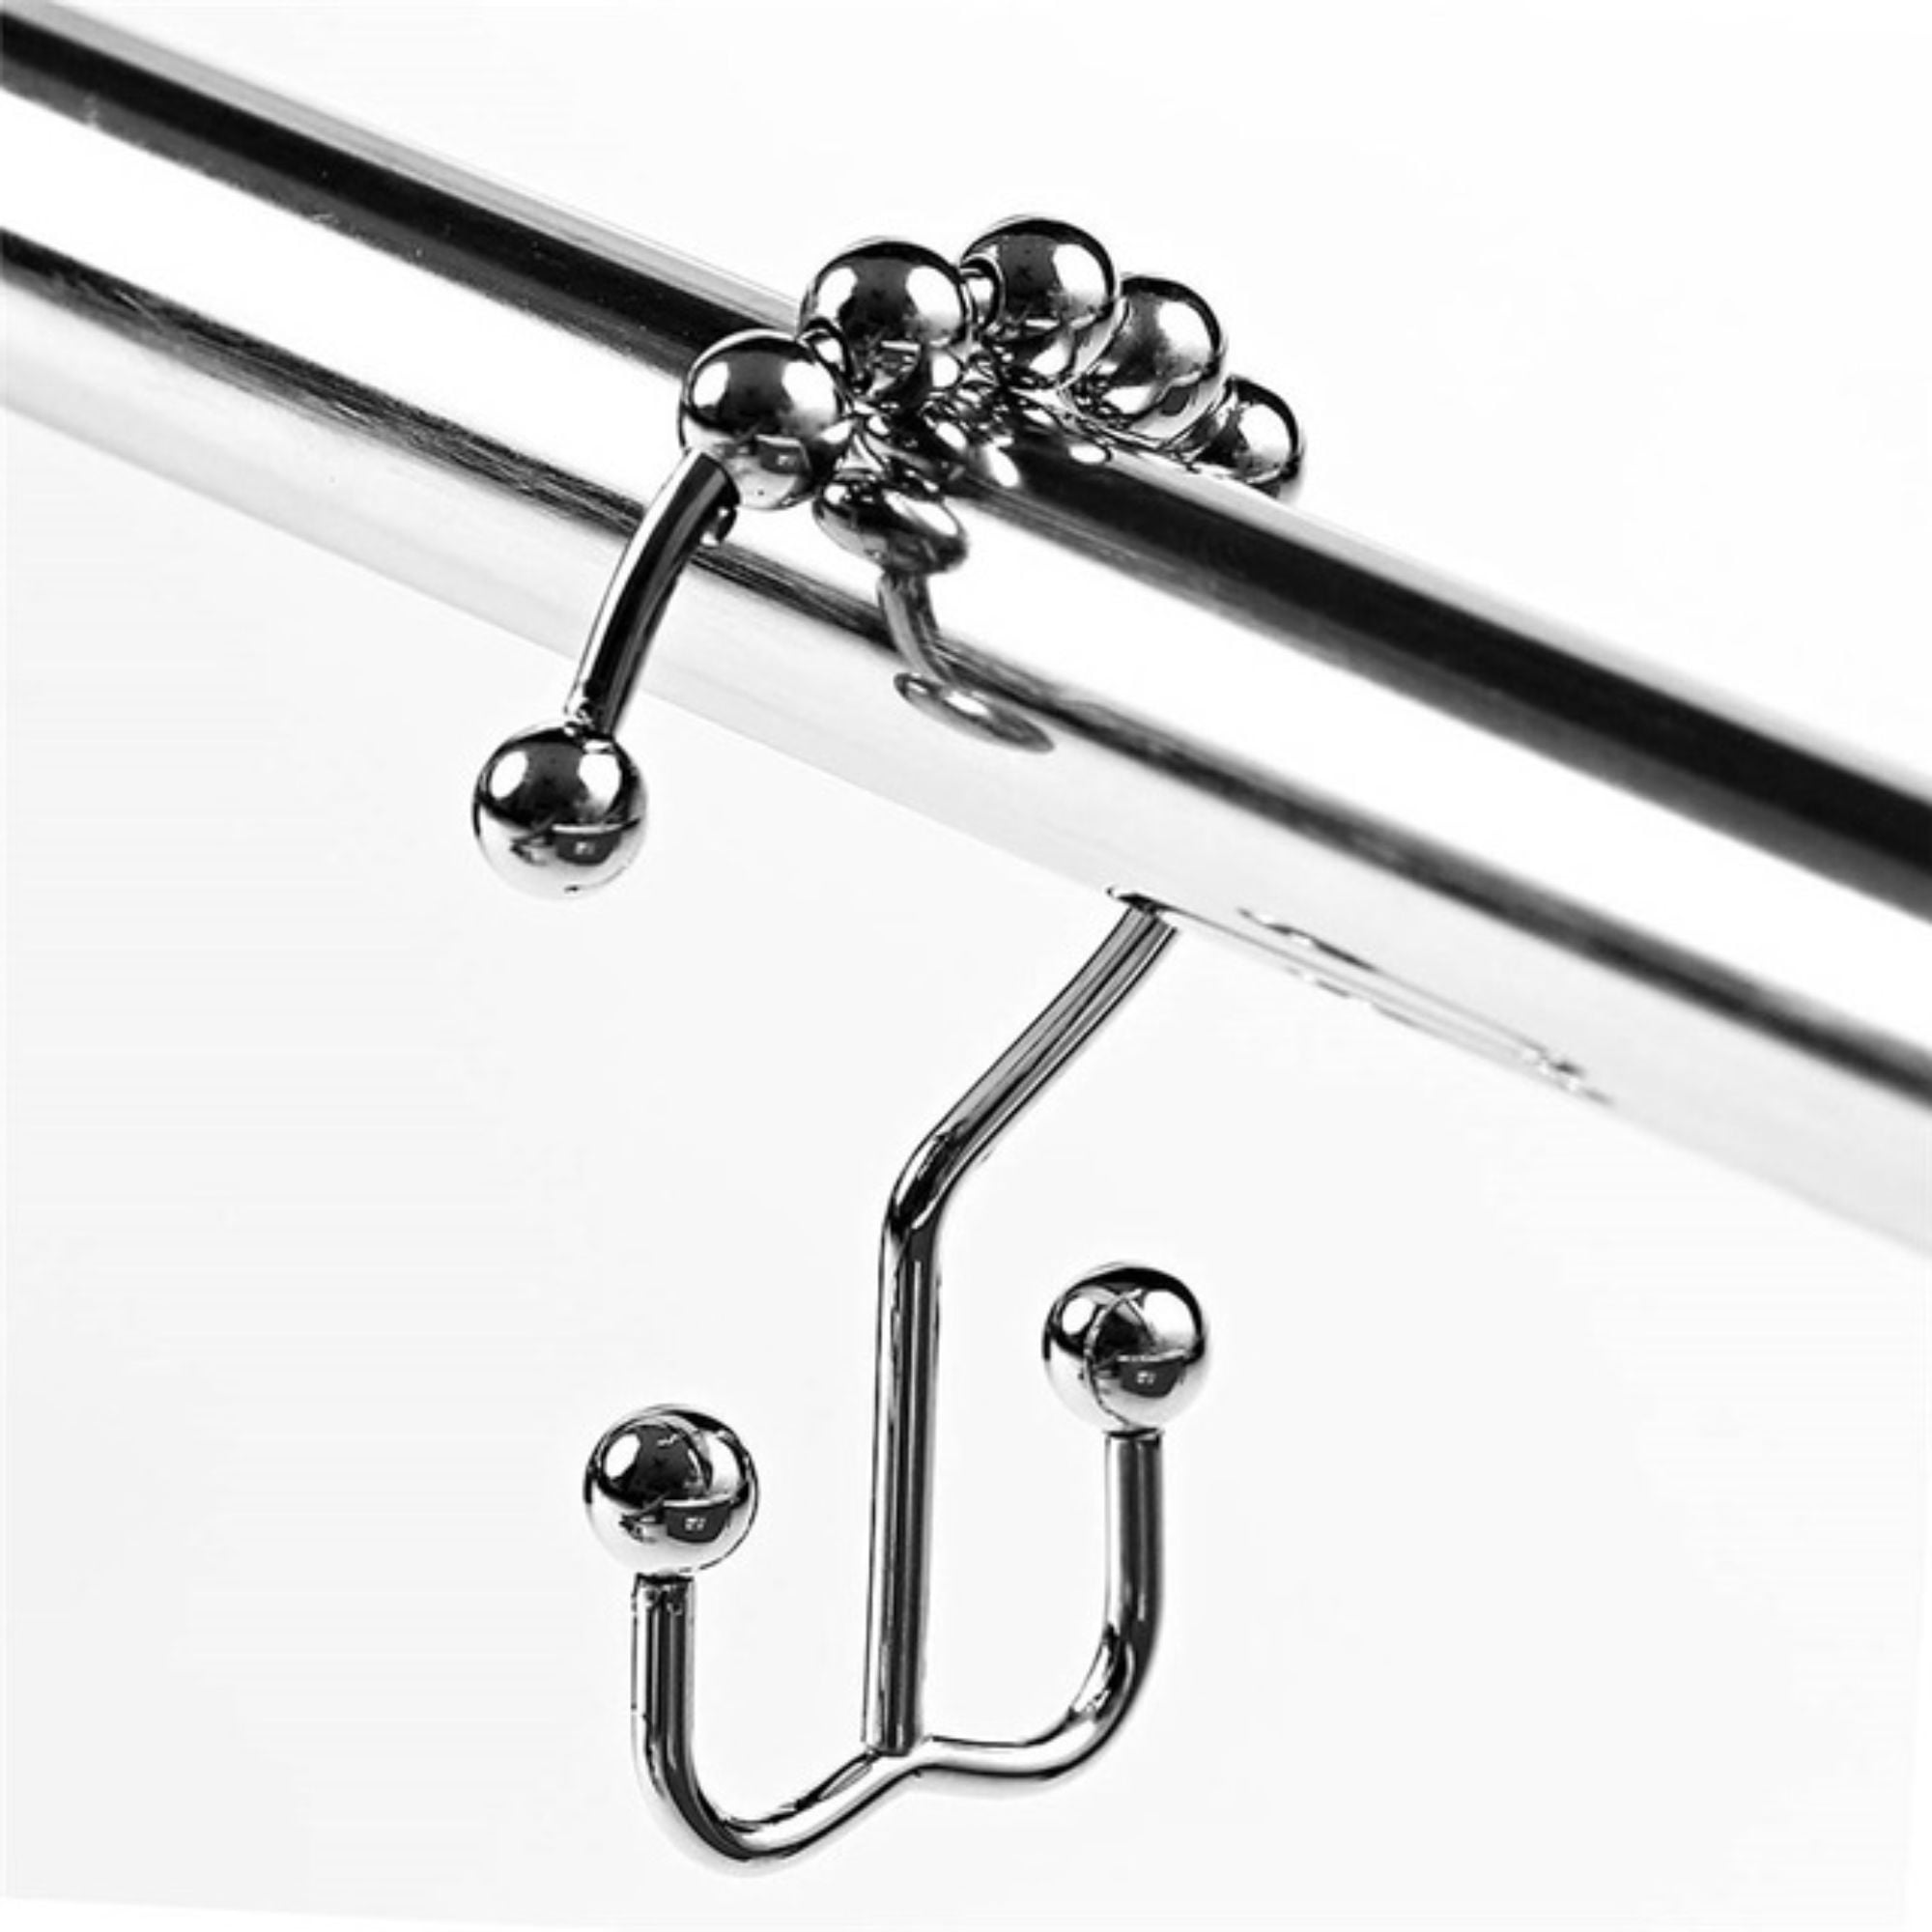 Set of 12 Onerbuy Stainless Steel Shower Curtain Hook Rings Double Glide with Smooth Roller Balls